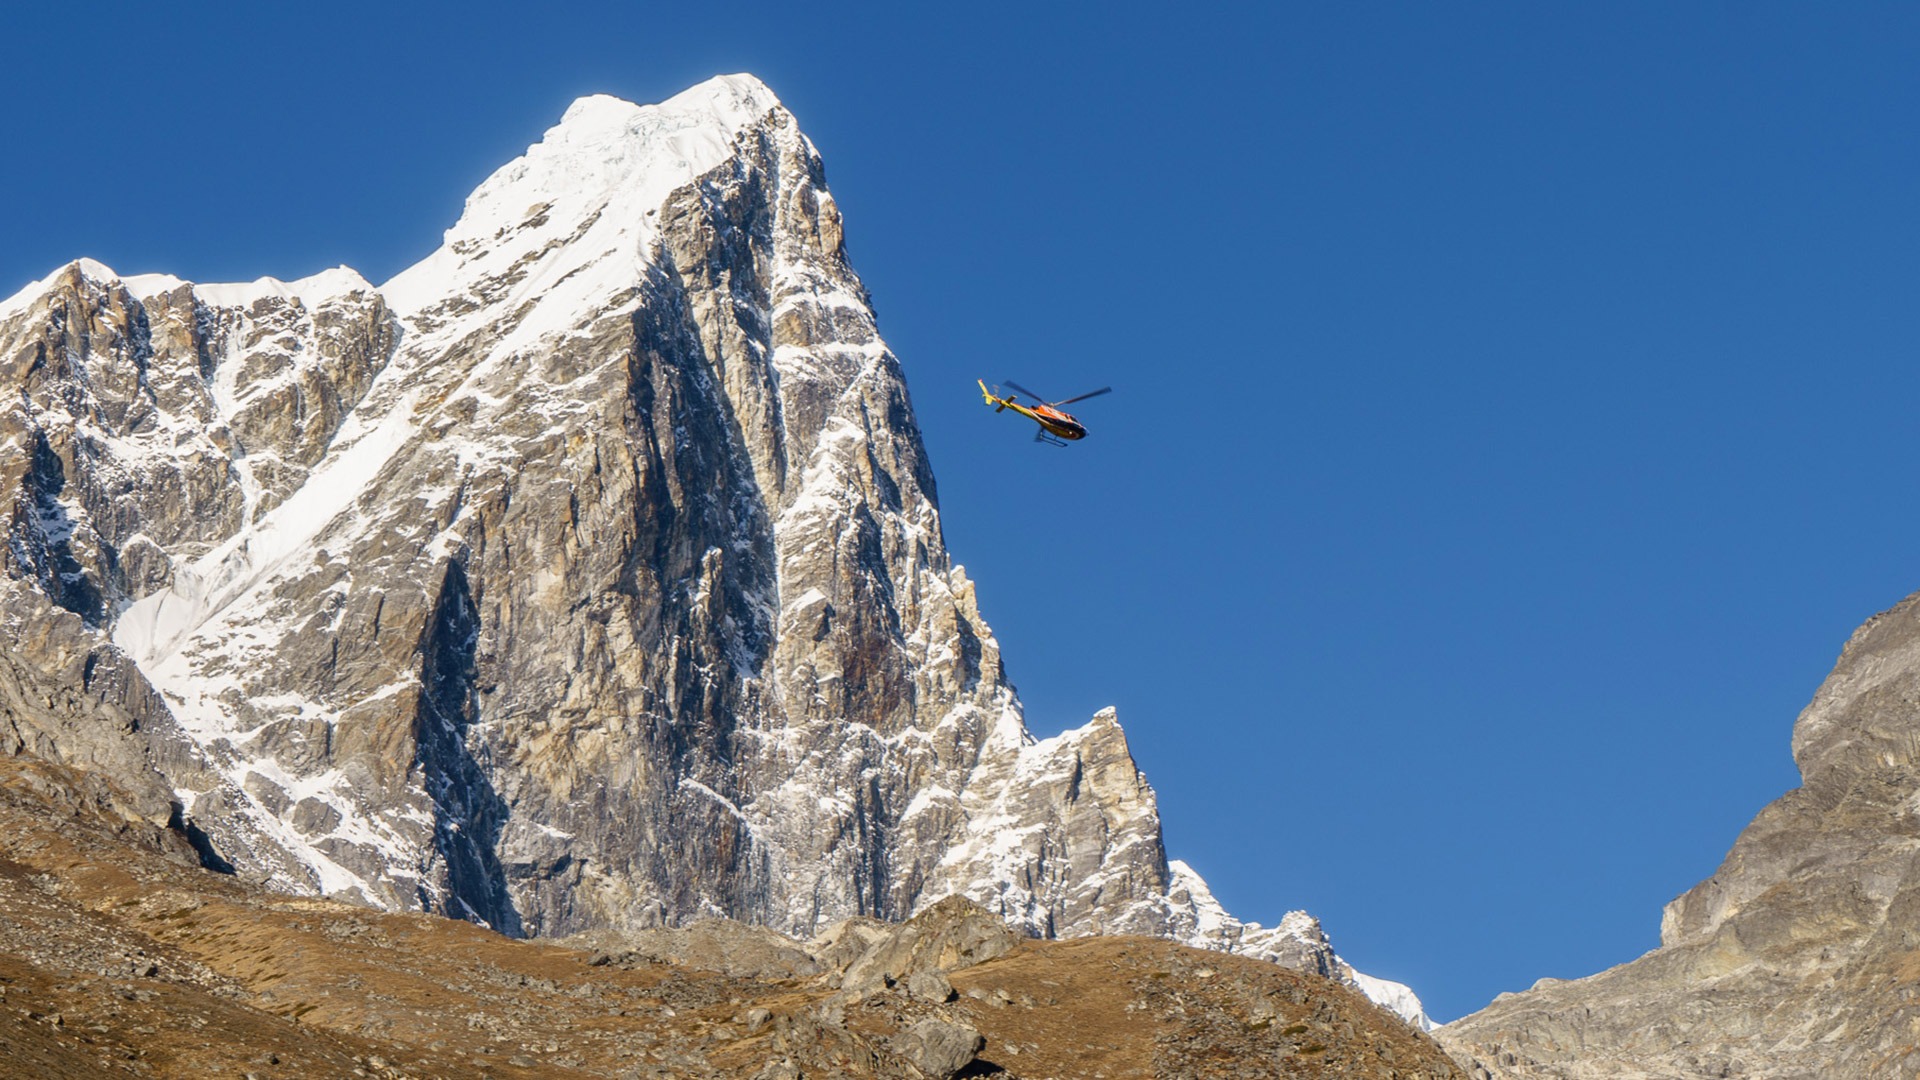 Helicopter fly by to view the summit of Everest, Nepal